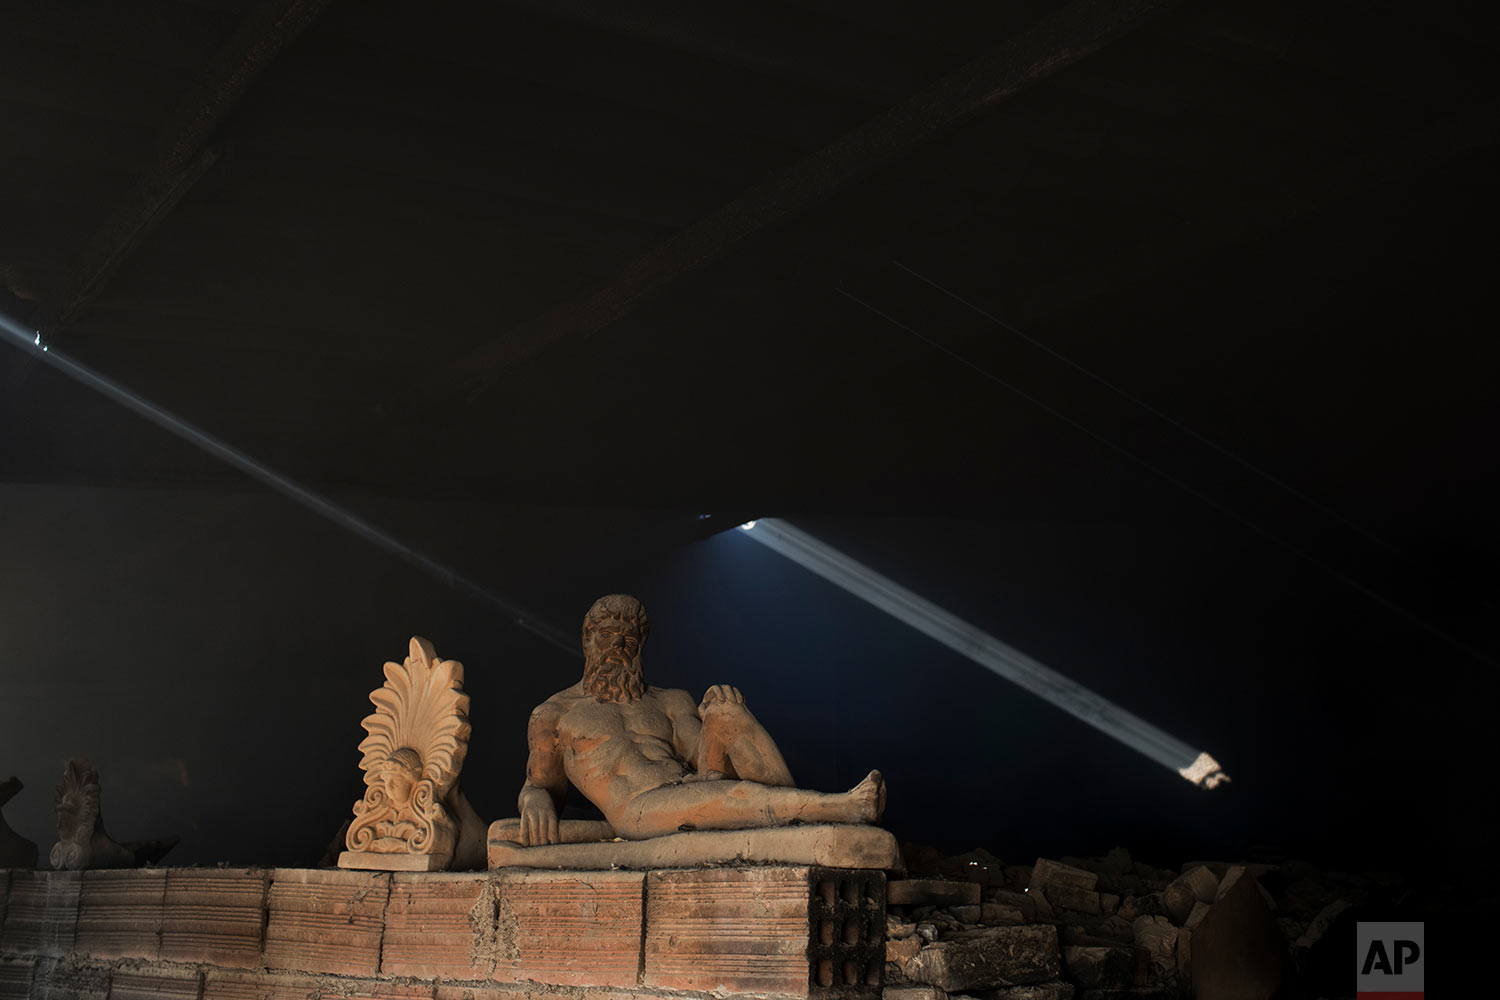  In this Friday, Nov. 20, 2017 photo, a sooty, dust-covered terracotta statue of Greek mythological hero Hercules, a son of Zeus, stands on top of a burning furnace next to an antefix in Haralambos Goumas' sculpture and ceramic workshop, in the Egale